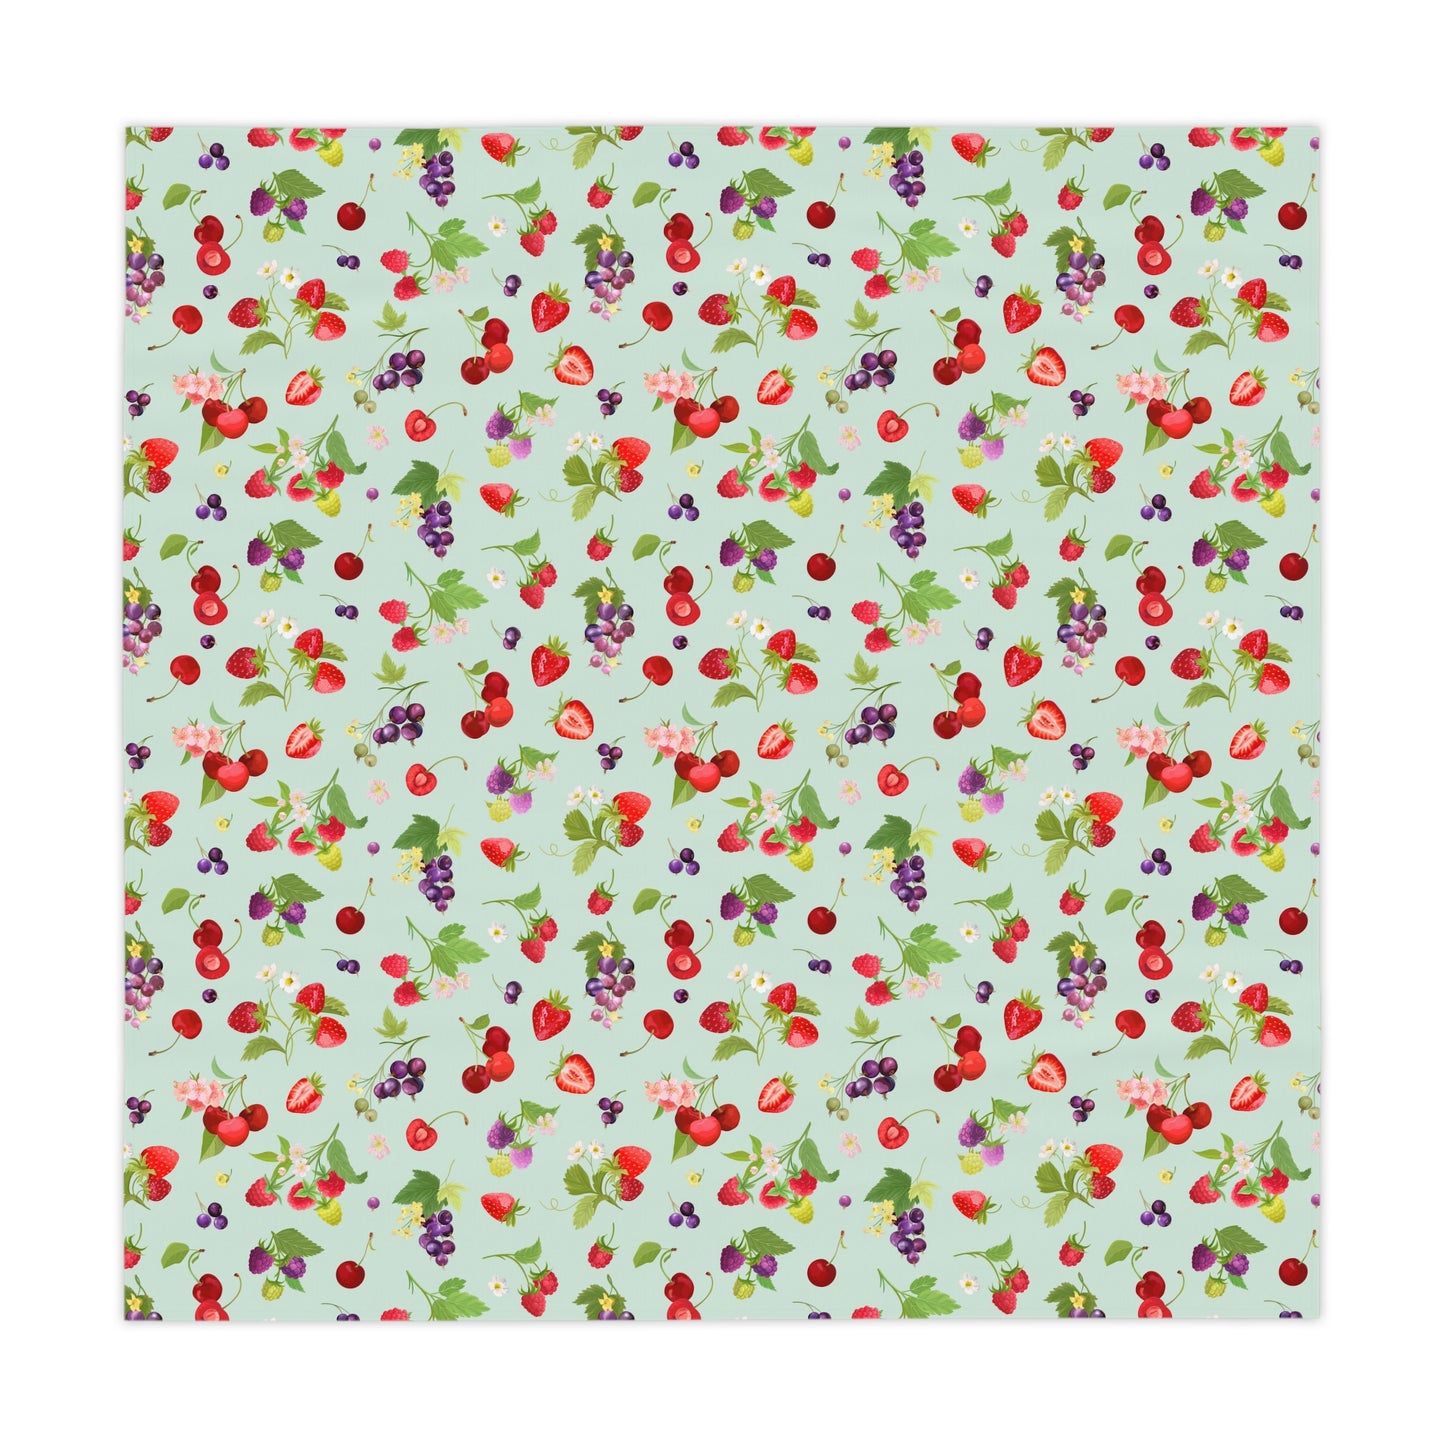 Cherries and Strawberries Tablecloth